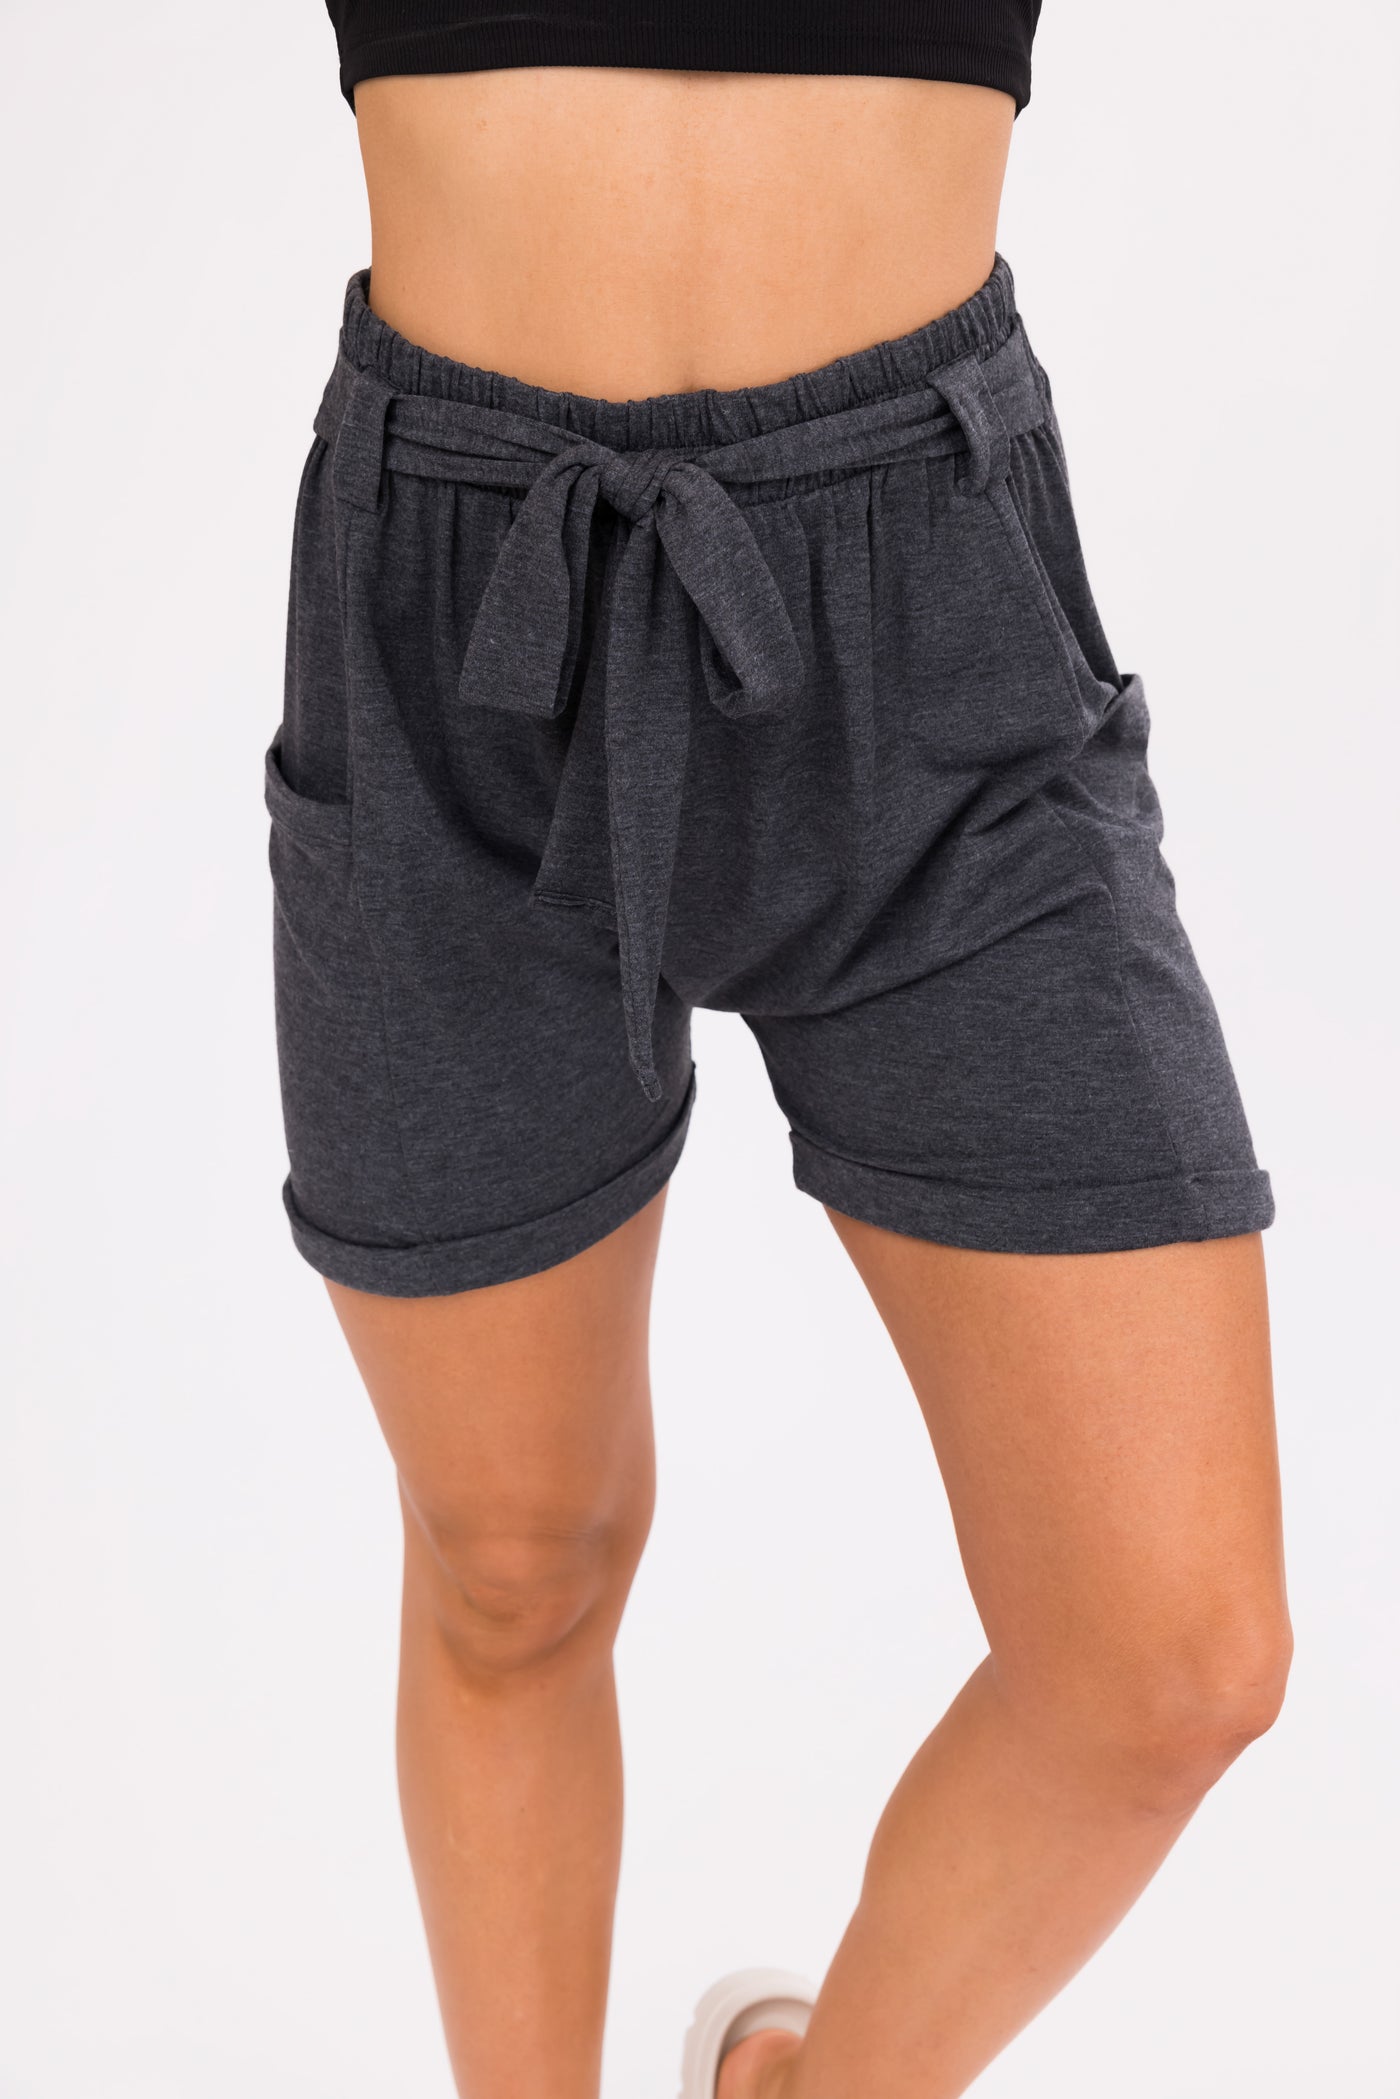 Charcoal Front Tie Knit Shorts